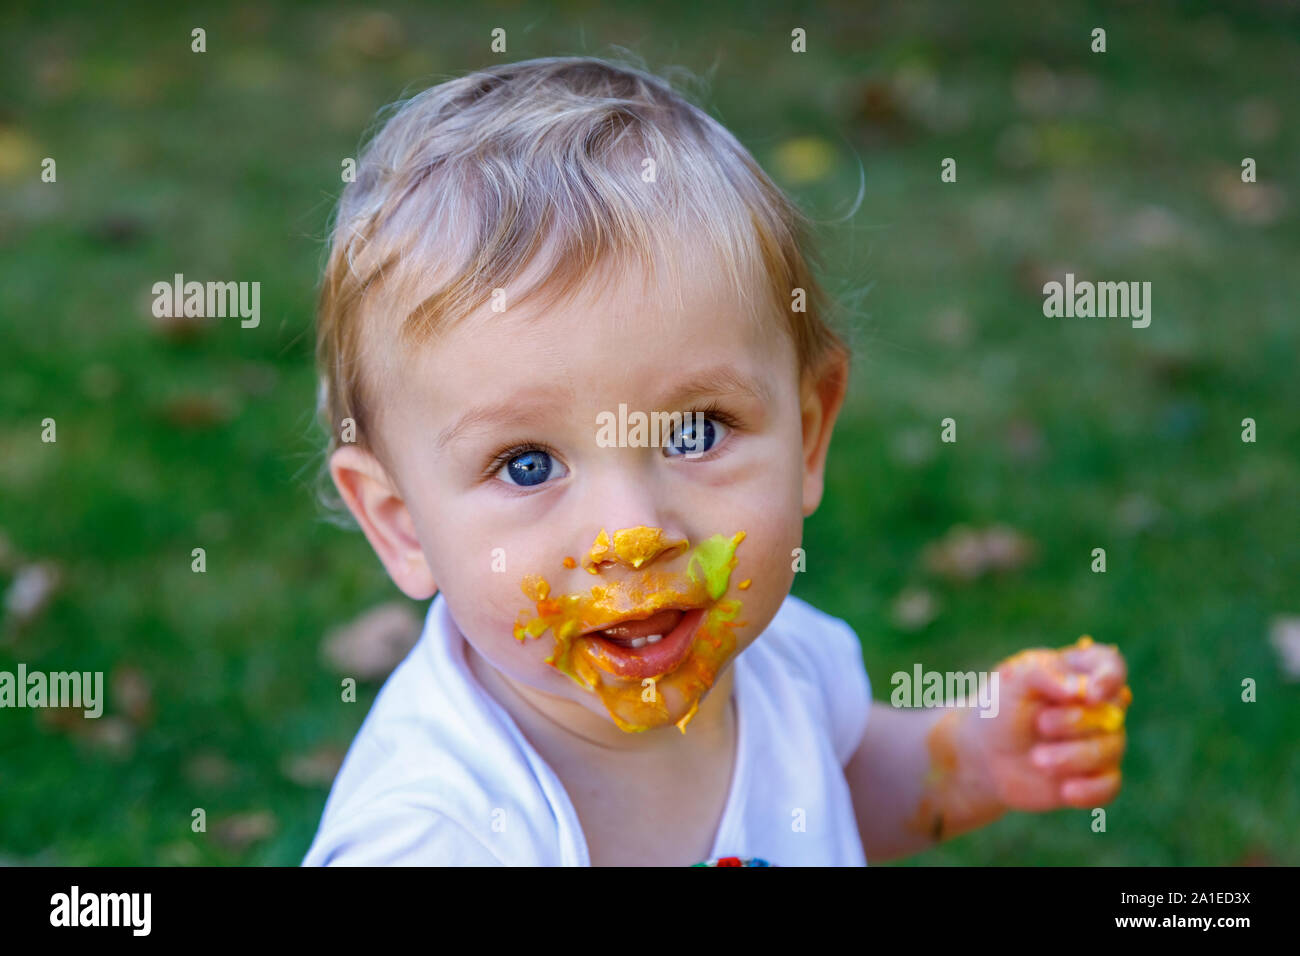 An adorable baby boy enjoys celebrating his first birthday at a party with a cake smash of a brightly coloured iced cake outdoors in the garden Stock Photo